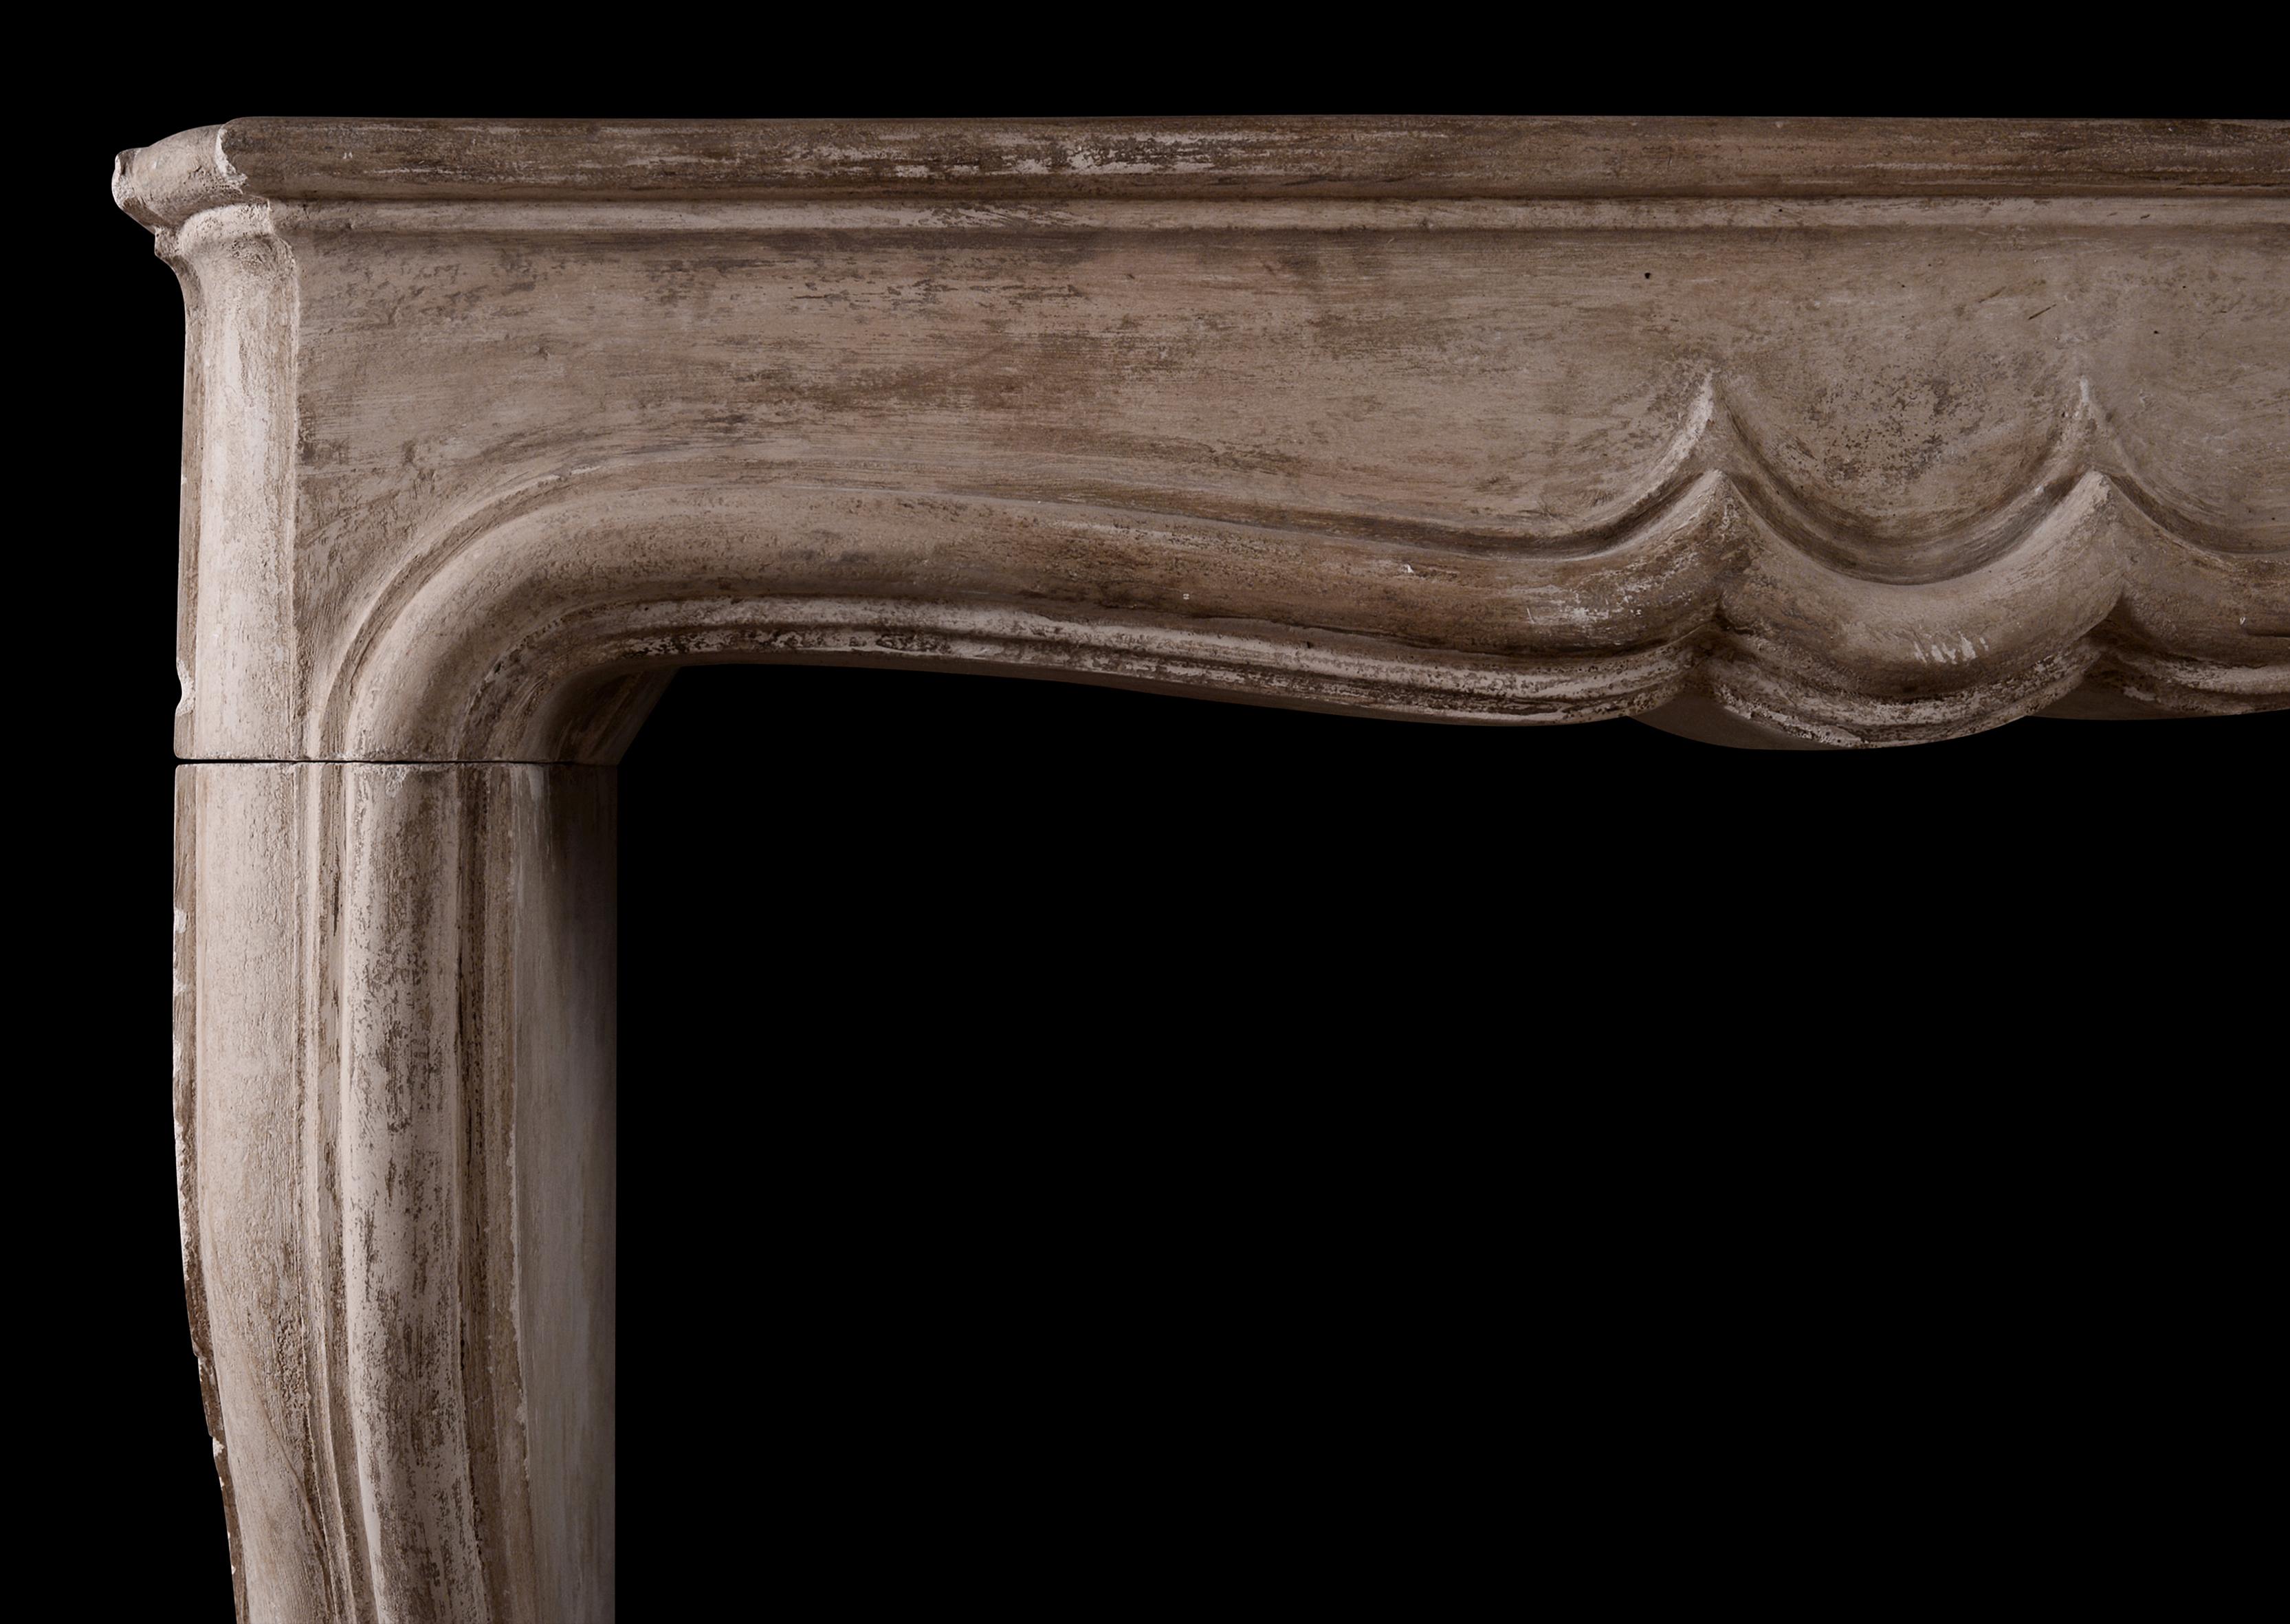 A period 18th century French Louis XIV stone fireplace. The moulded jambs surmounted by elegantly shaped frieze and shelf. Still at original depth, but could be reduced if necessary.

Measures: Shelf width: 1405 mm 55 